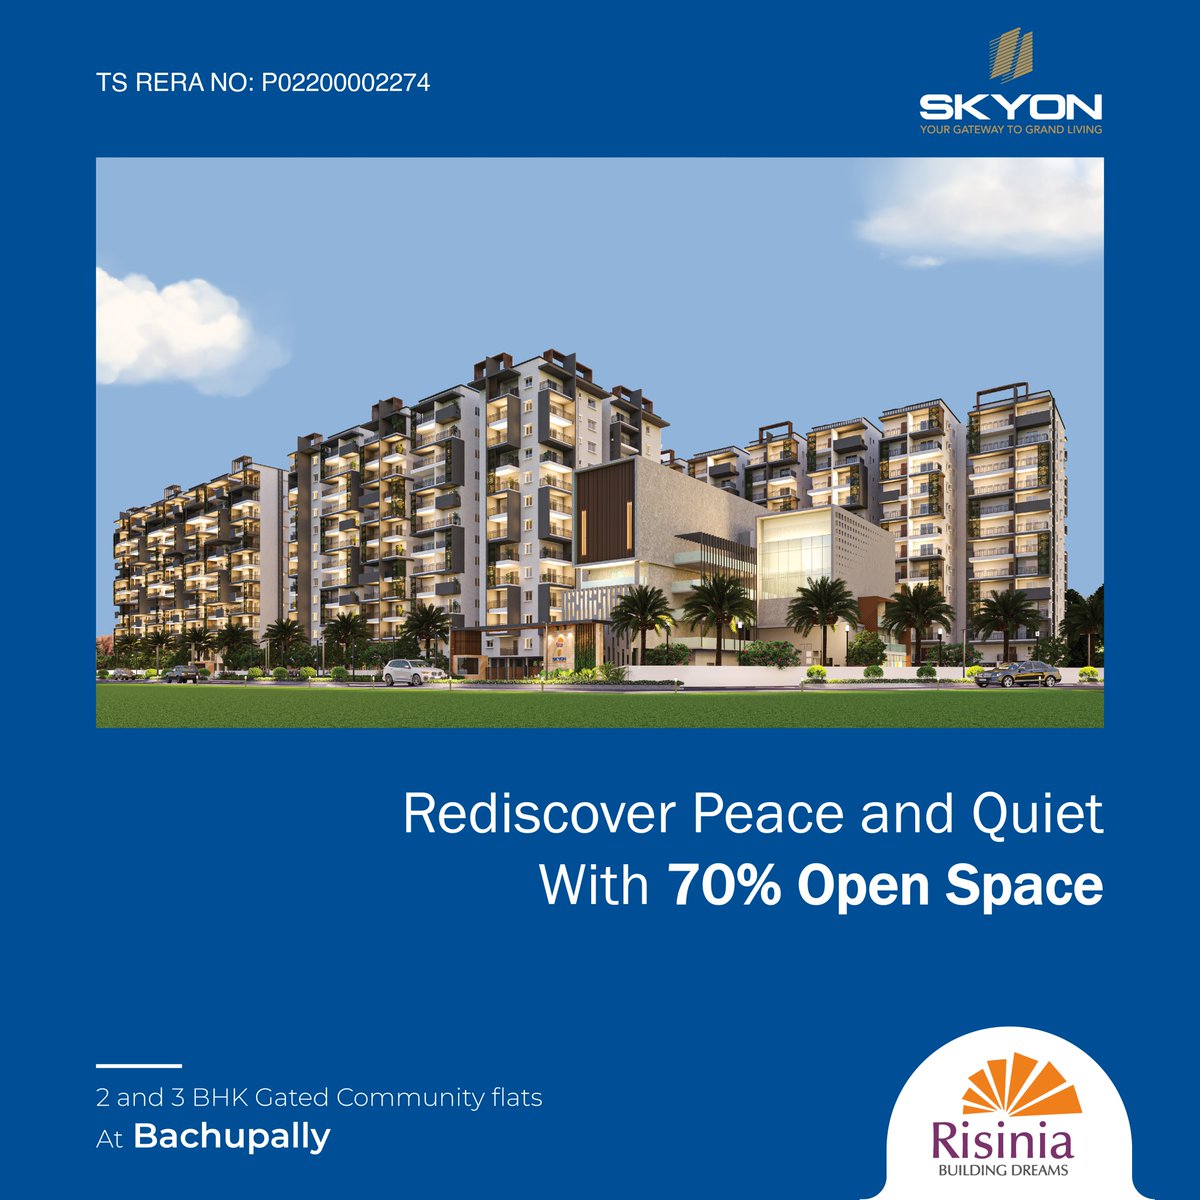 This paradise on earth comes with 70% open space for you to indulge your spare time enjoying the vast open that surrounds you.
.
#risinia #risiniabuilders #risiniaskyon #2bhkflats #3bhkflats #openspace #spaciousflats #spaciousapartments #luxuryliving #ExclusiveProperties